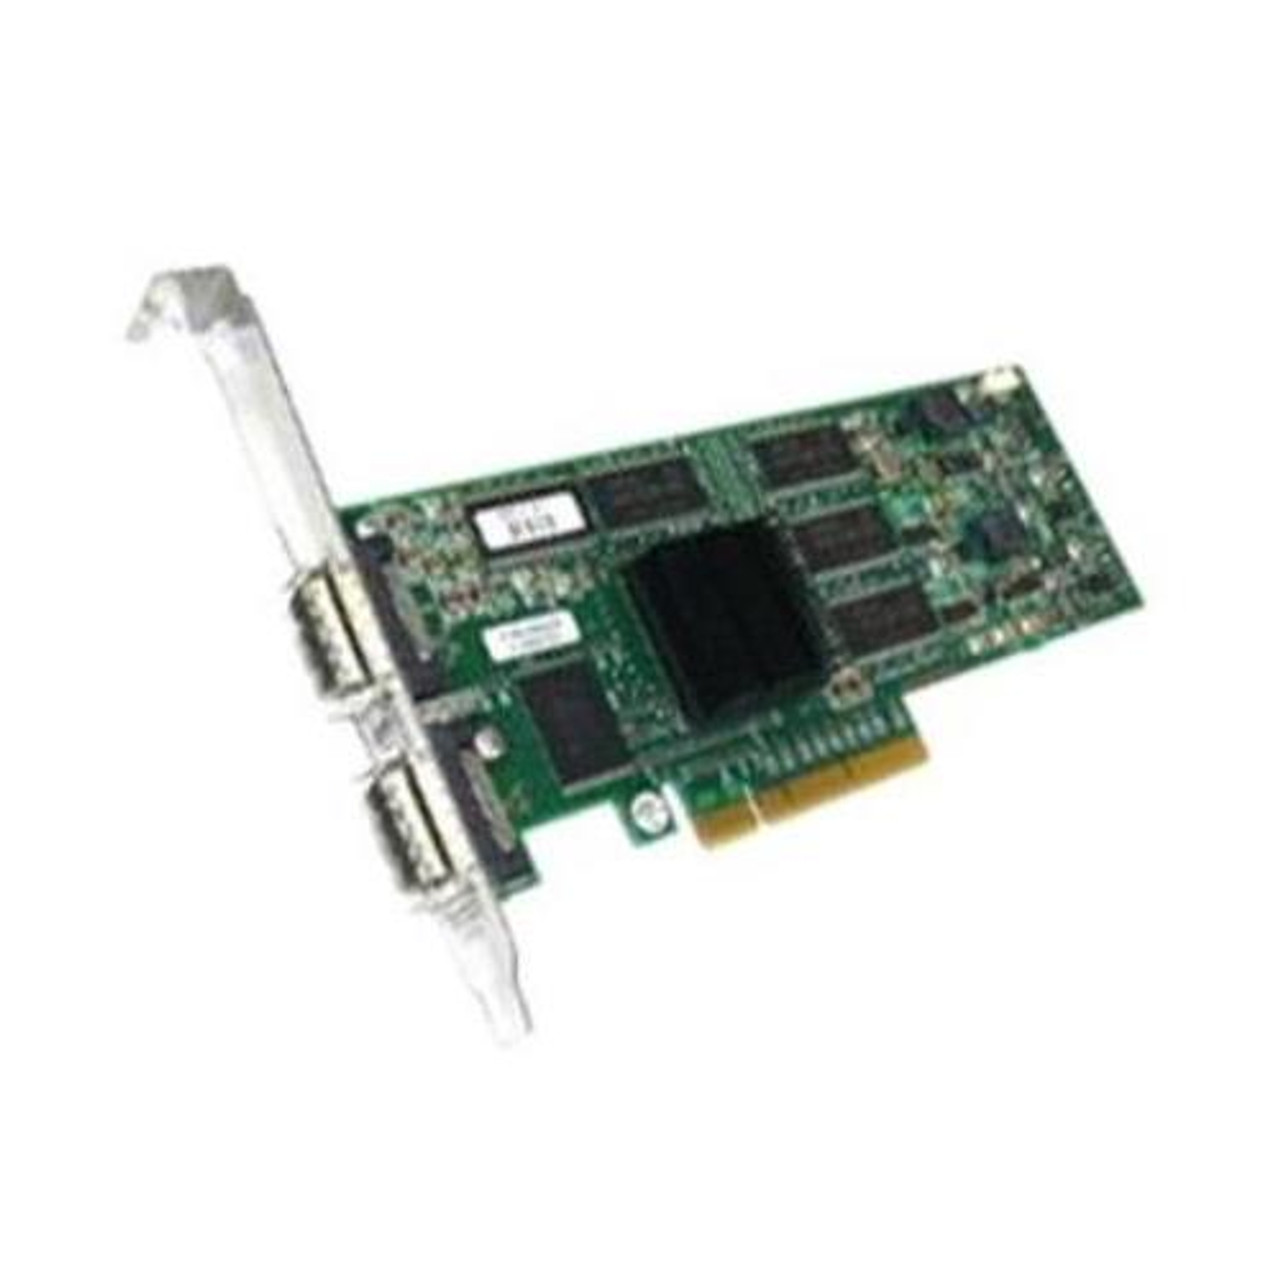 375-3382 Sun Dual-Port 4x PCI-Express Infiniband Host Channel Adapter (Low Profile) for Sun Fire X4200 M2